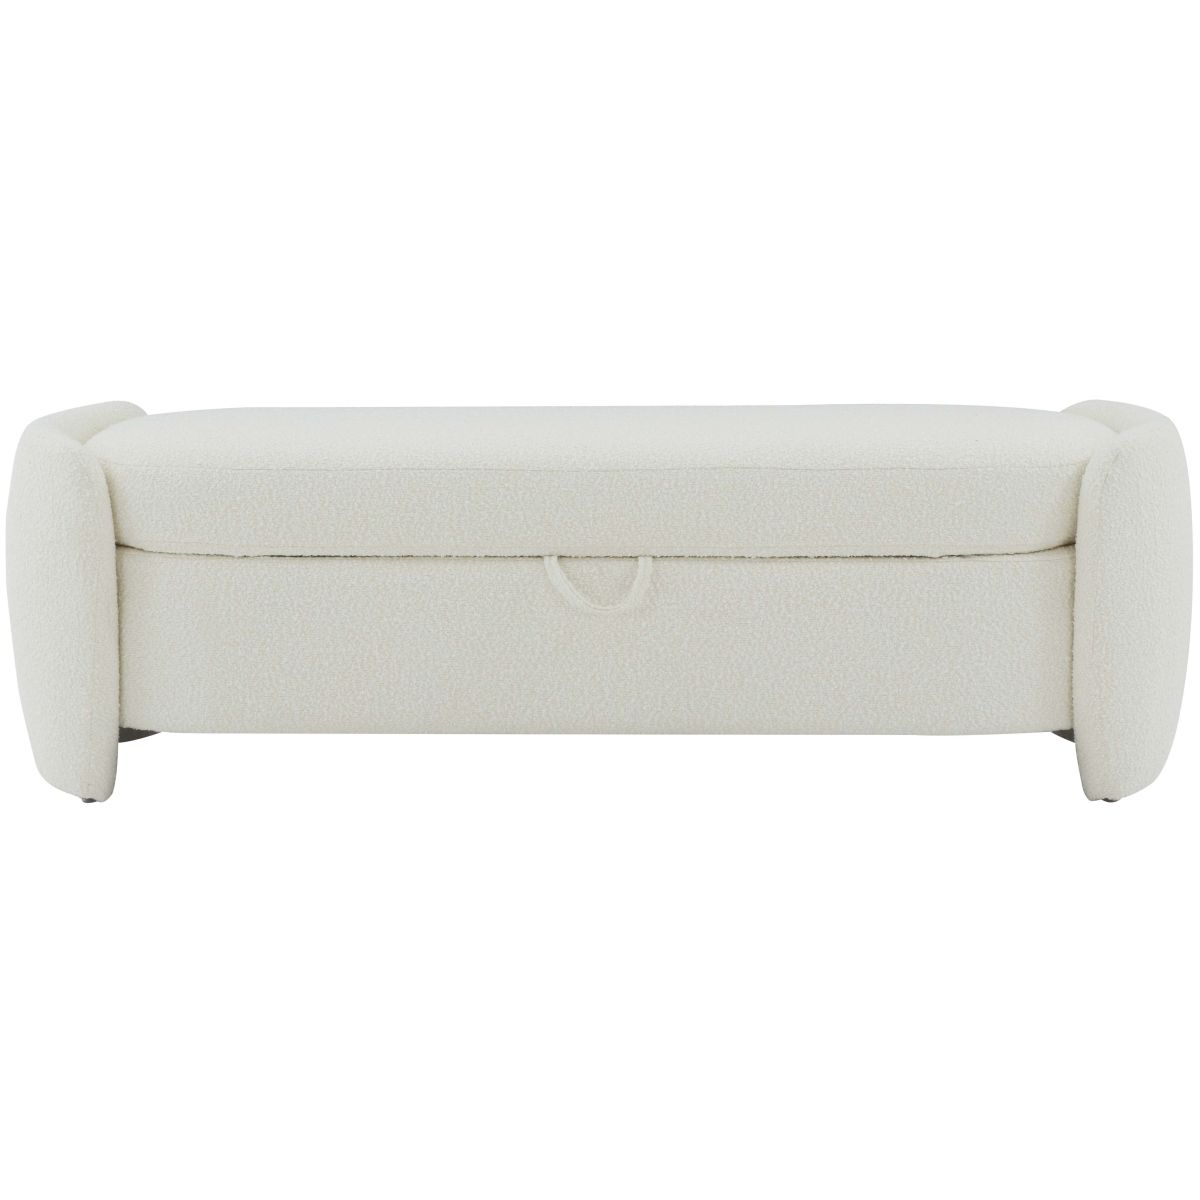 Safavieh Couture Danianna Boucle Bench - Ivory